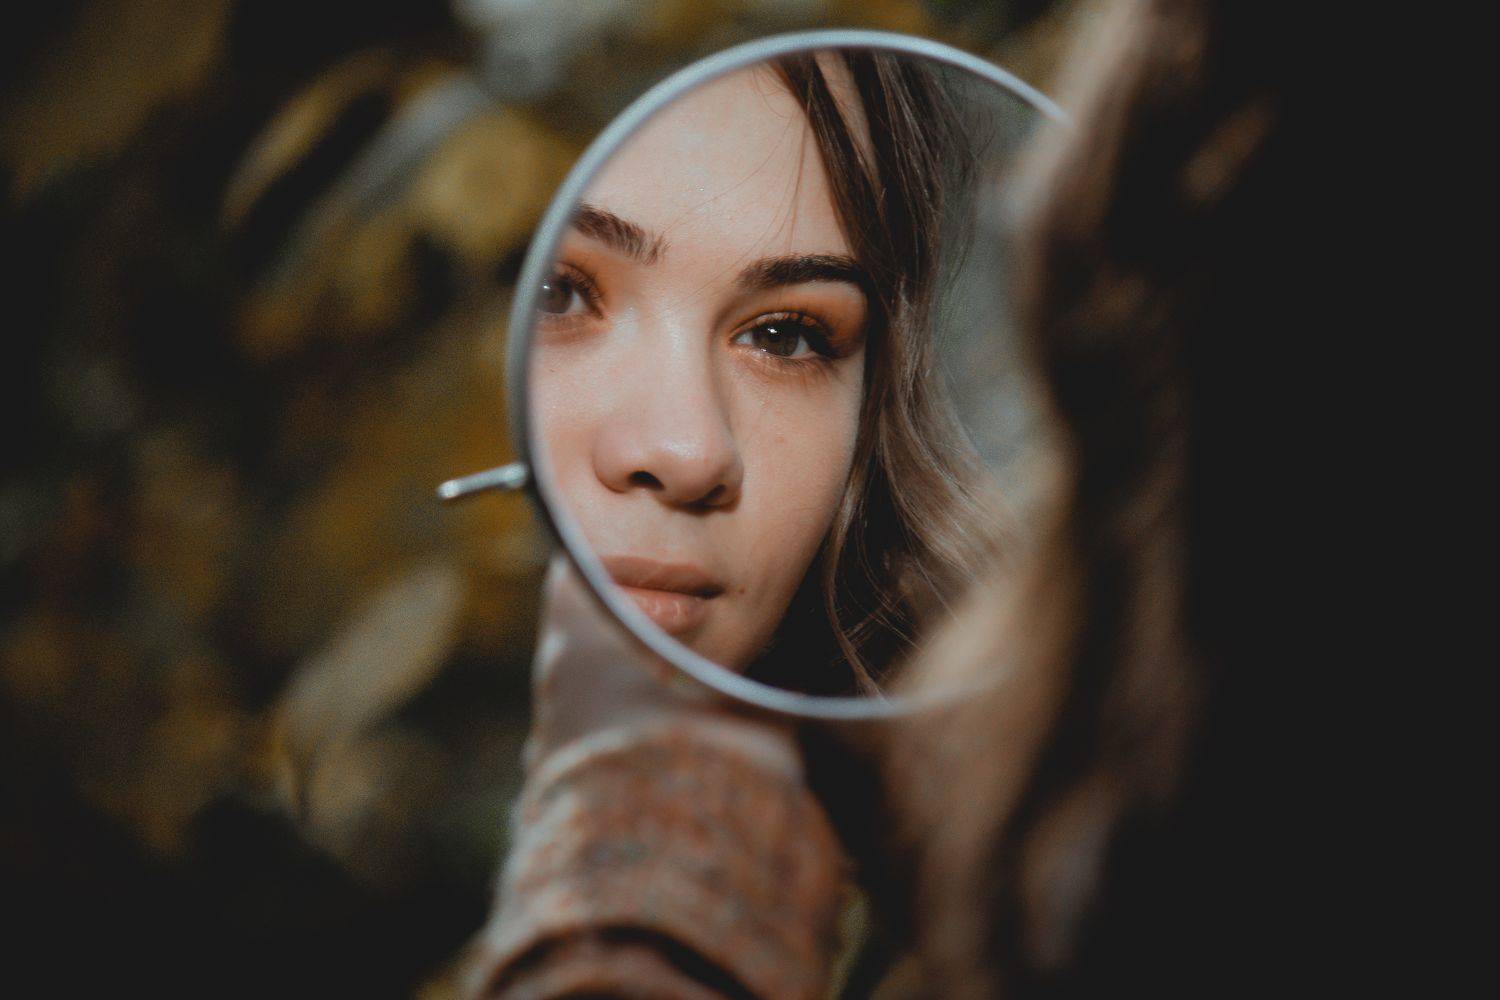 woman's face in the mirror Photo by Elisa Photography on unsplash